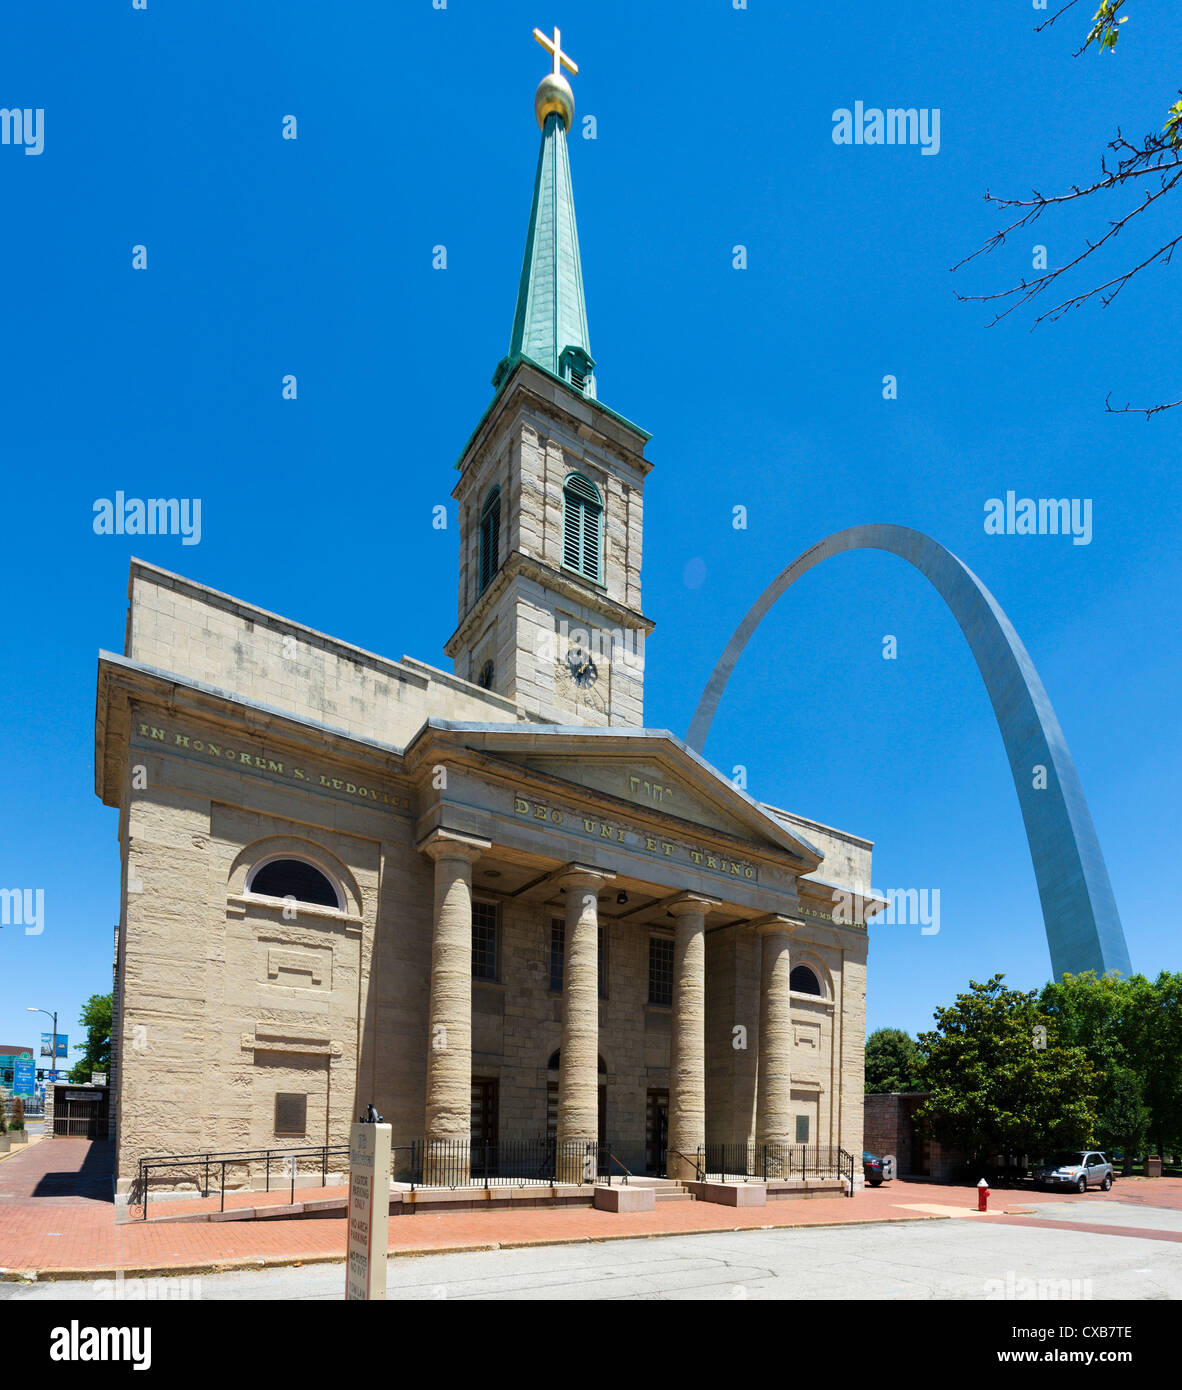 The Old Cathedral (The Basilica of Saint Louis, King of France) with the Gateway Arch behind, St Louis, Missouri, USA Stock Photo